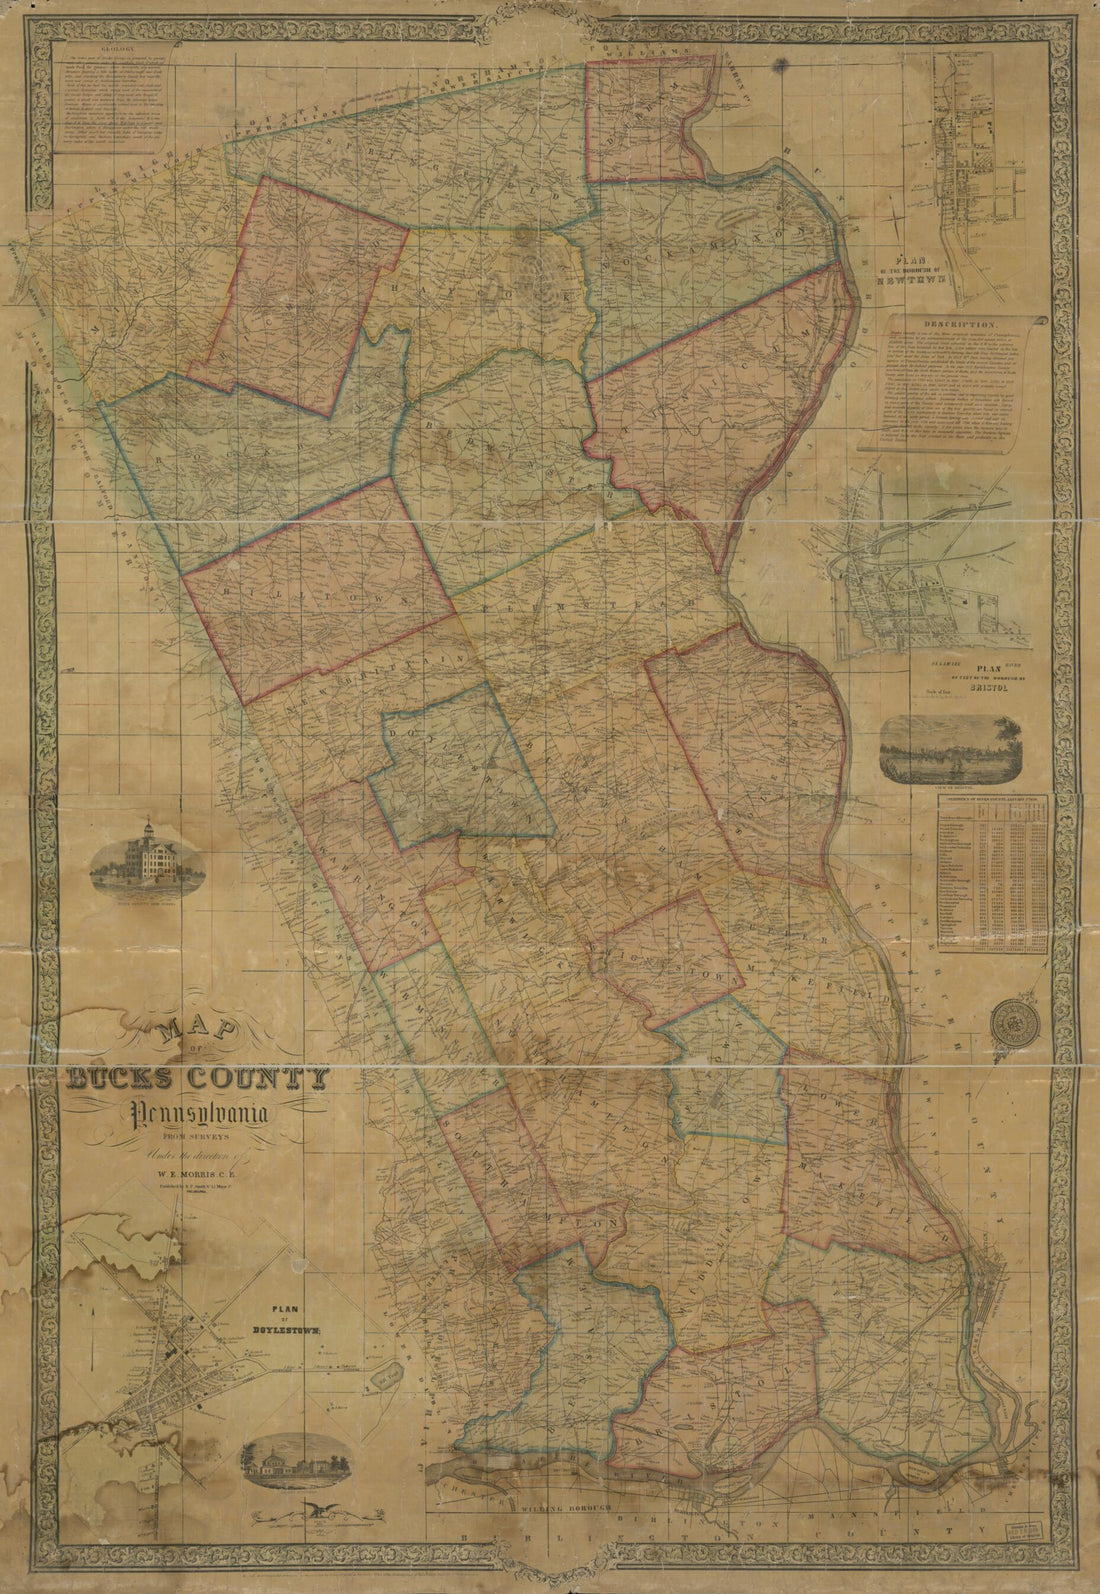 This old map of Map of Bucks County, Pennsylvania : from Surveys from 1850 was created by William E. (William Ellis) Morris, Robert Pearsall Smith in 1850